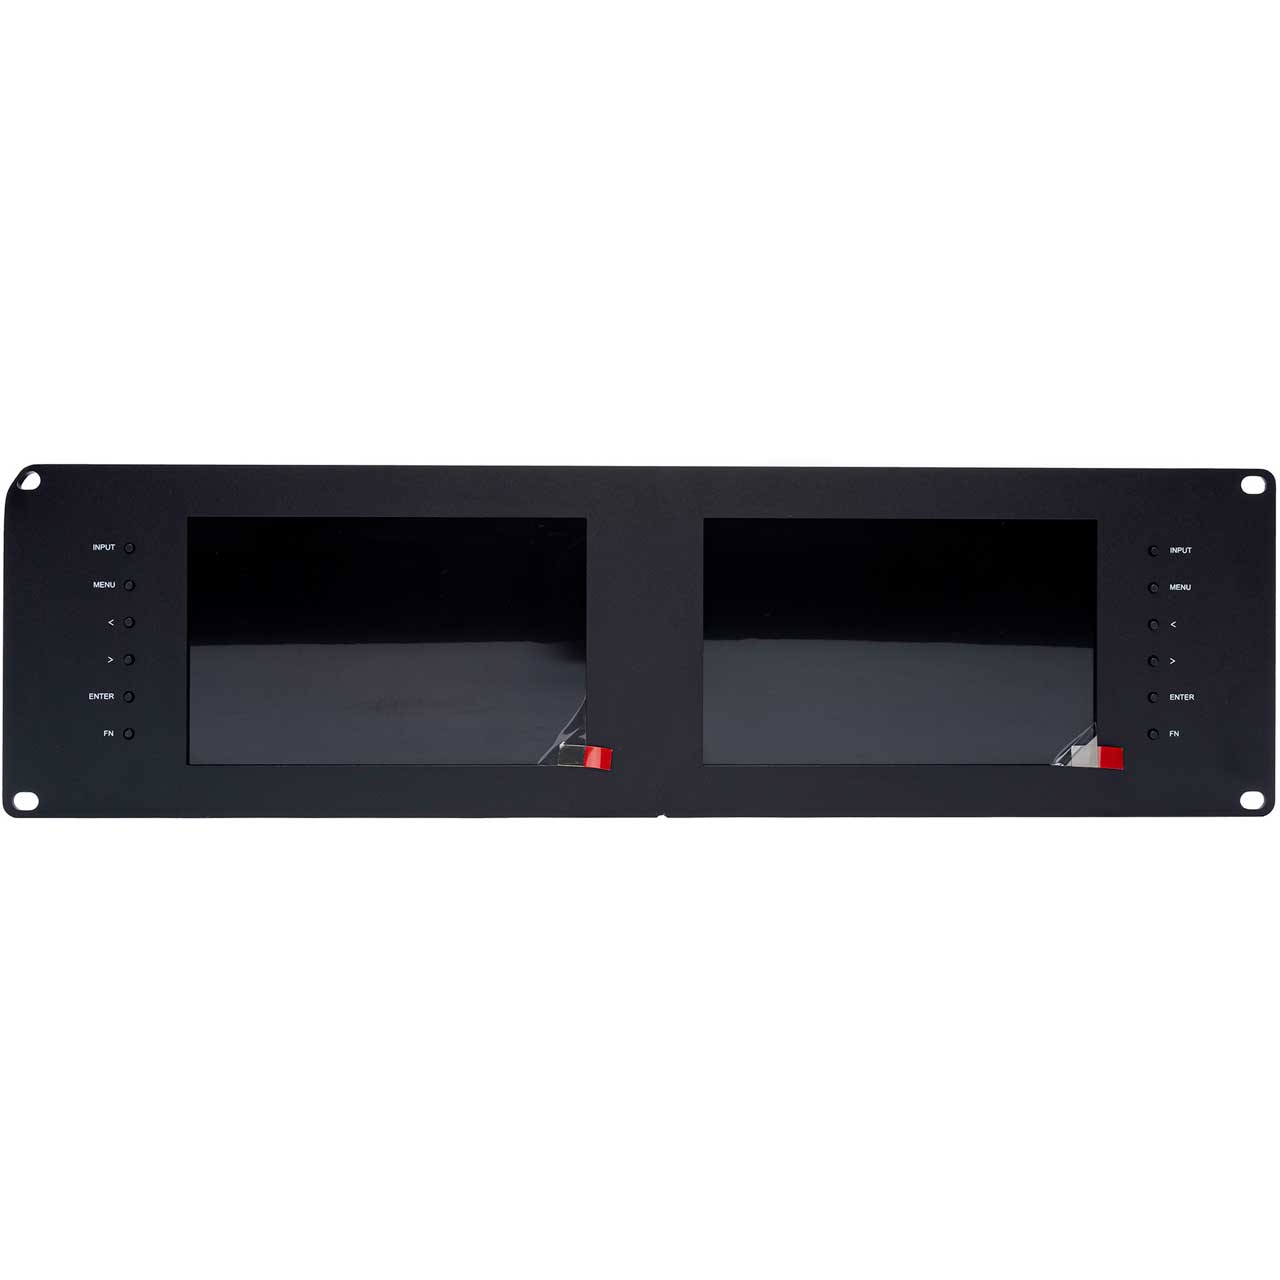 Delvcam Broadcast 3GHD/SD Multiformat Dual 7-Inch Rackmount Video Monitor - BStock (Bent Rack Ear) DELV-2LCD73GHD-B